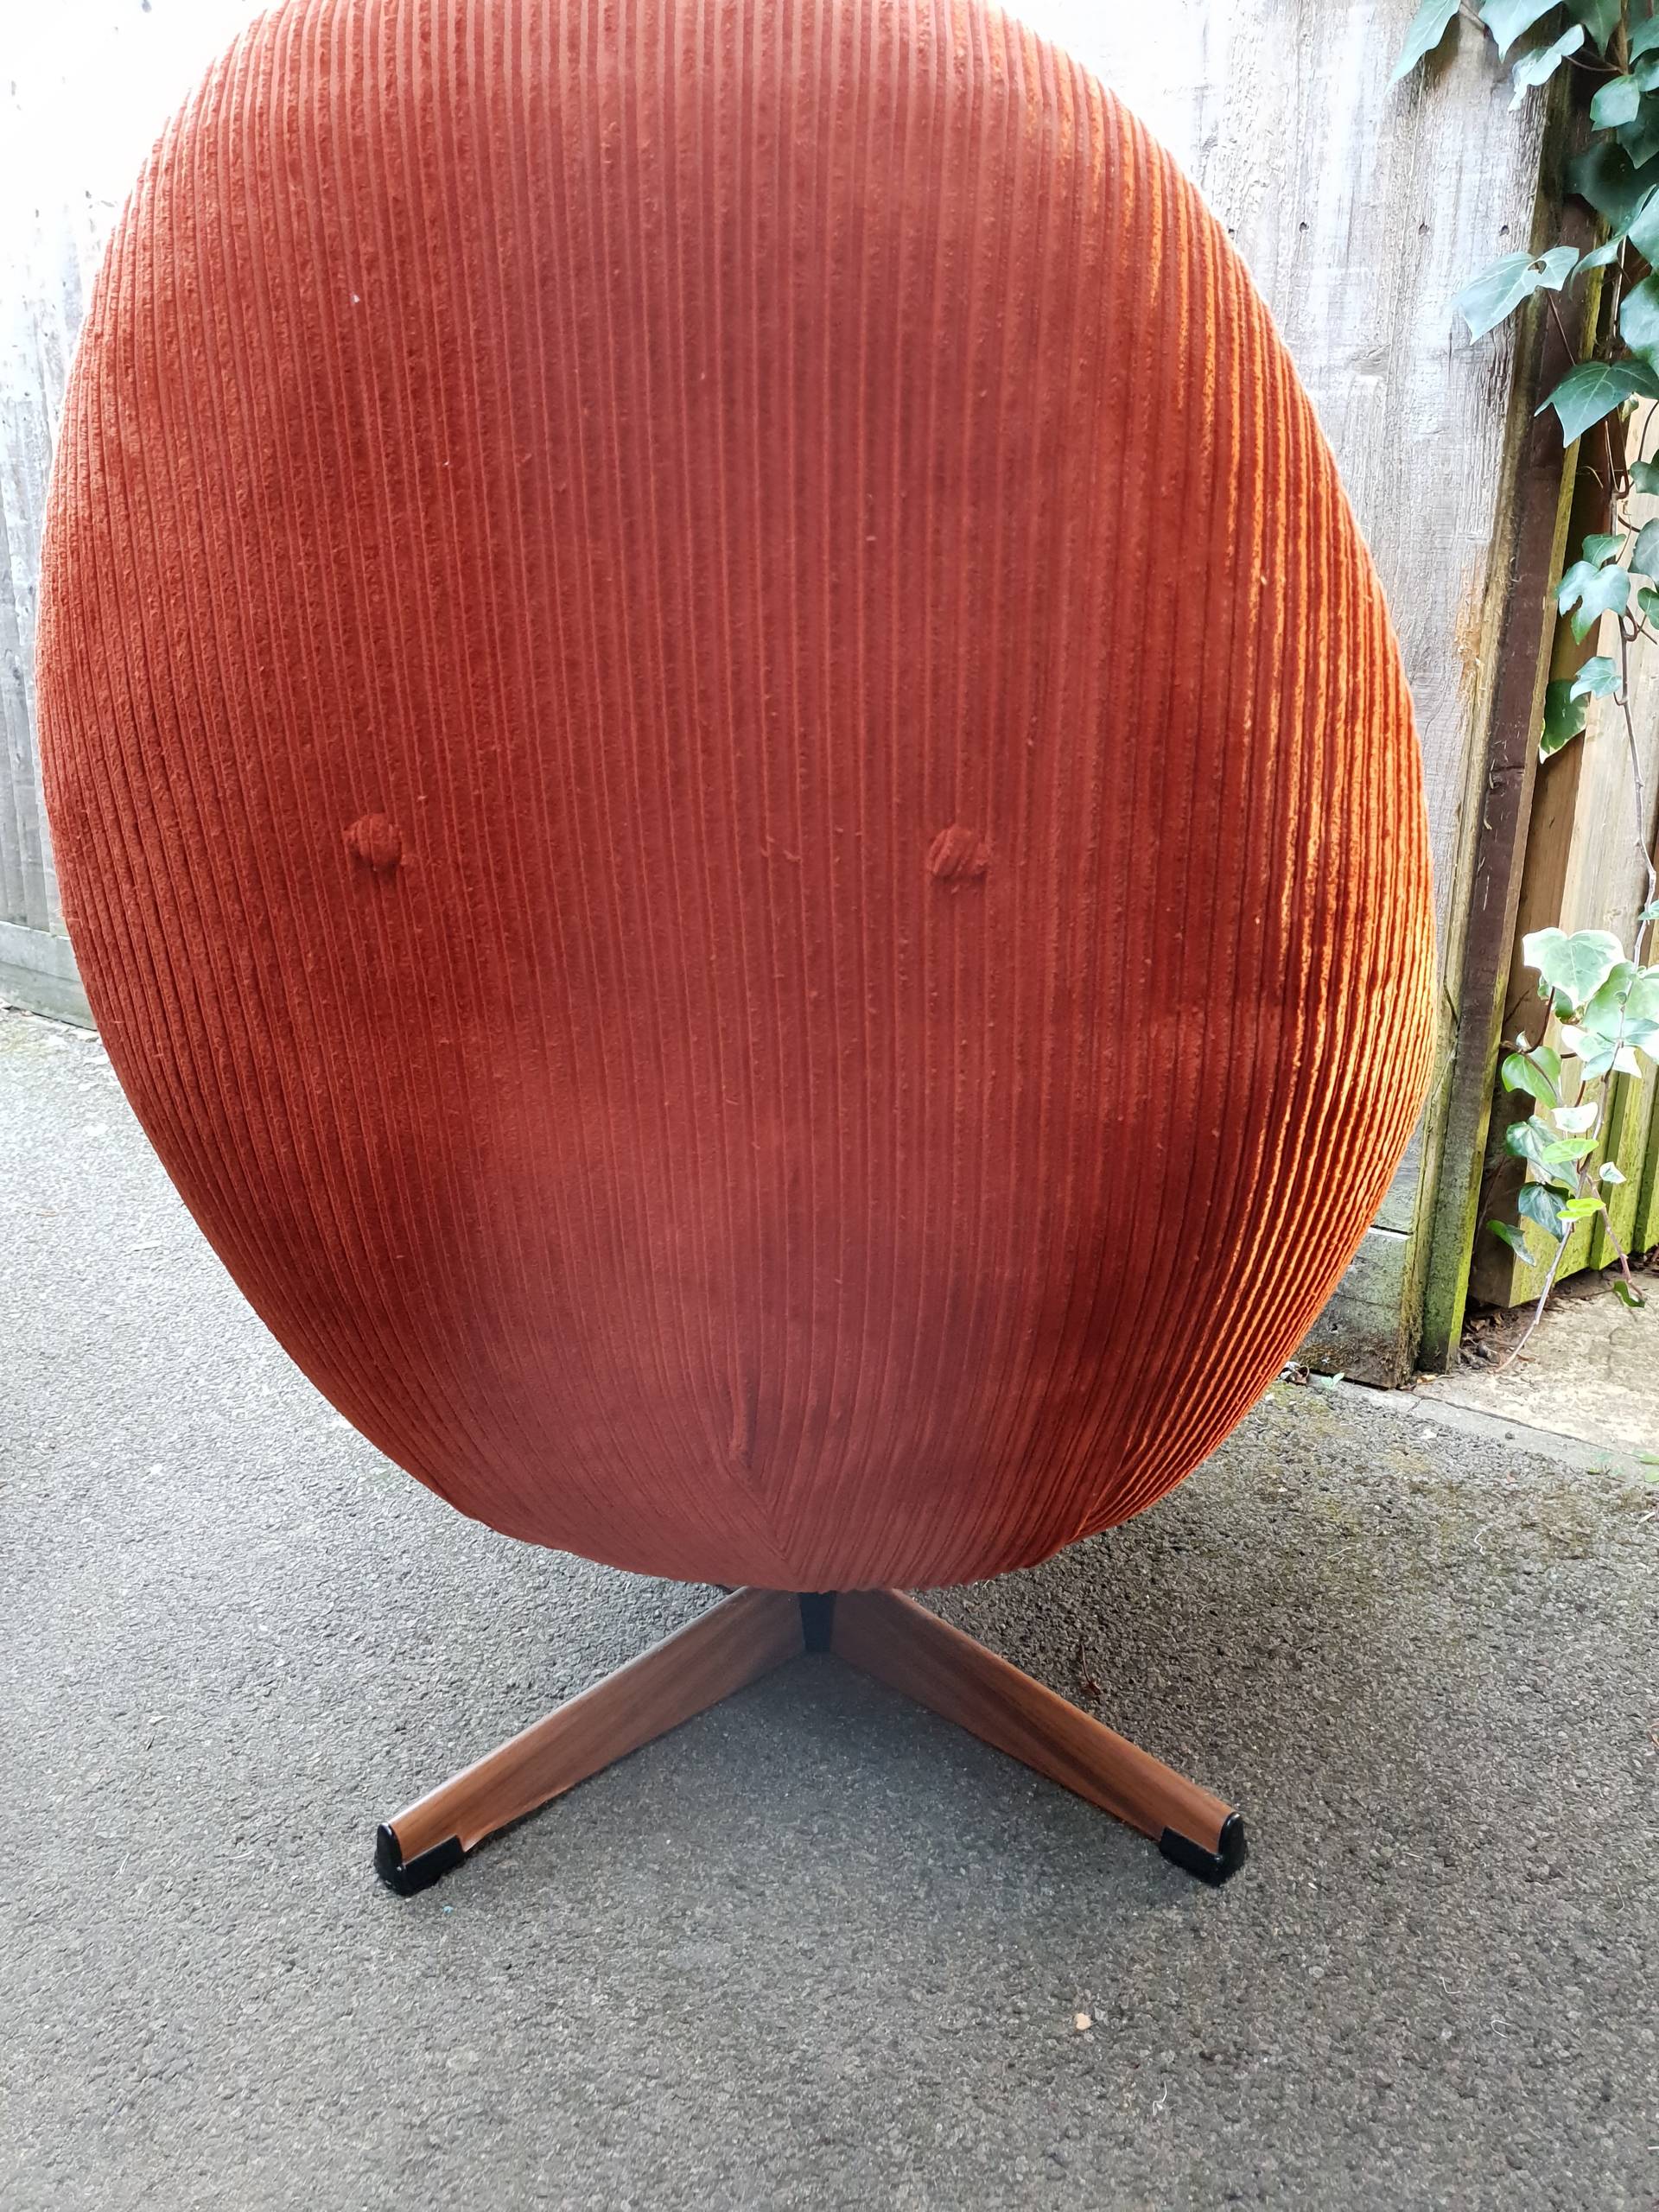 Greaves and Thomes Egg Chair